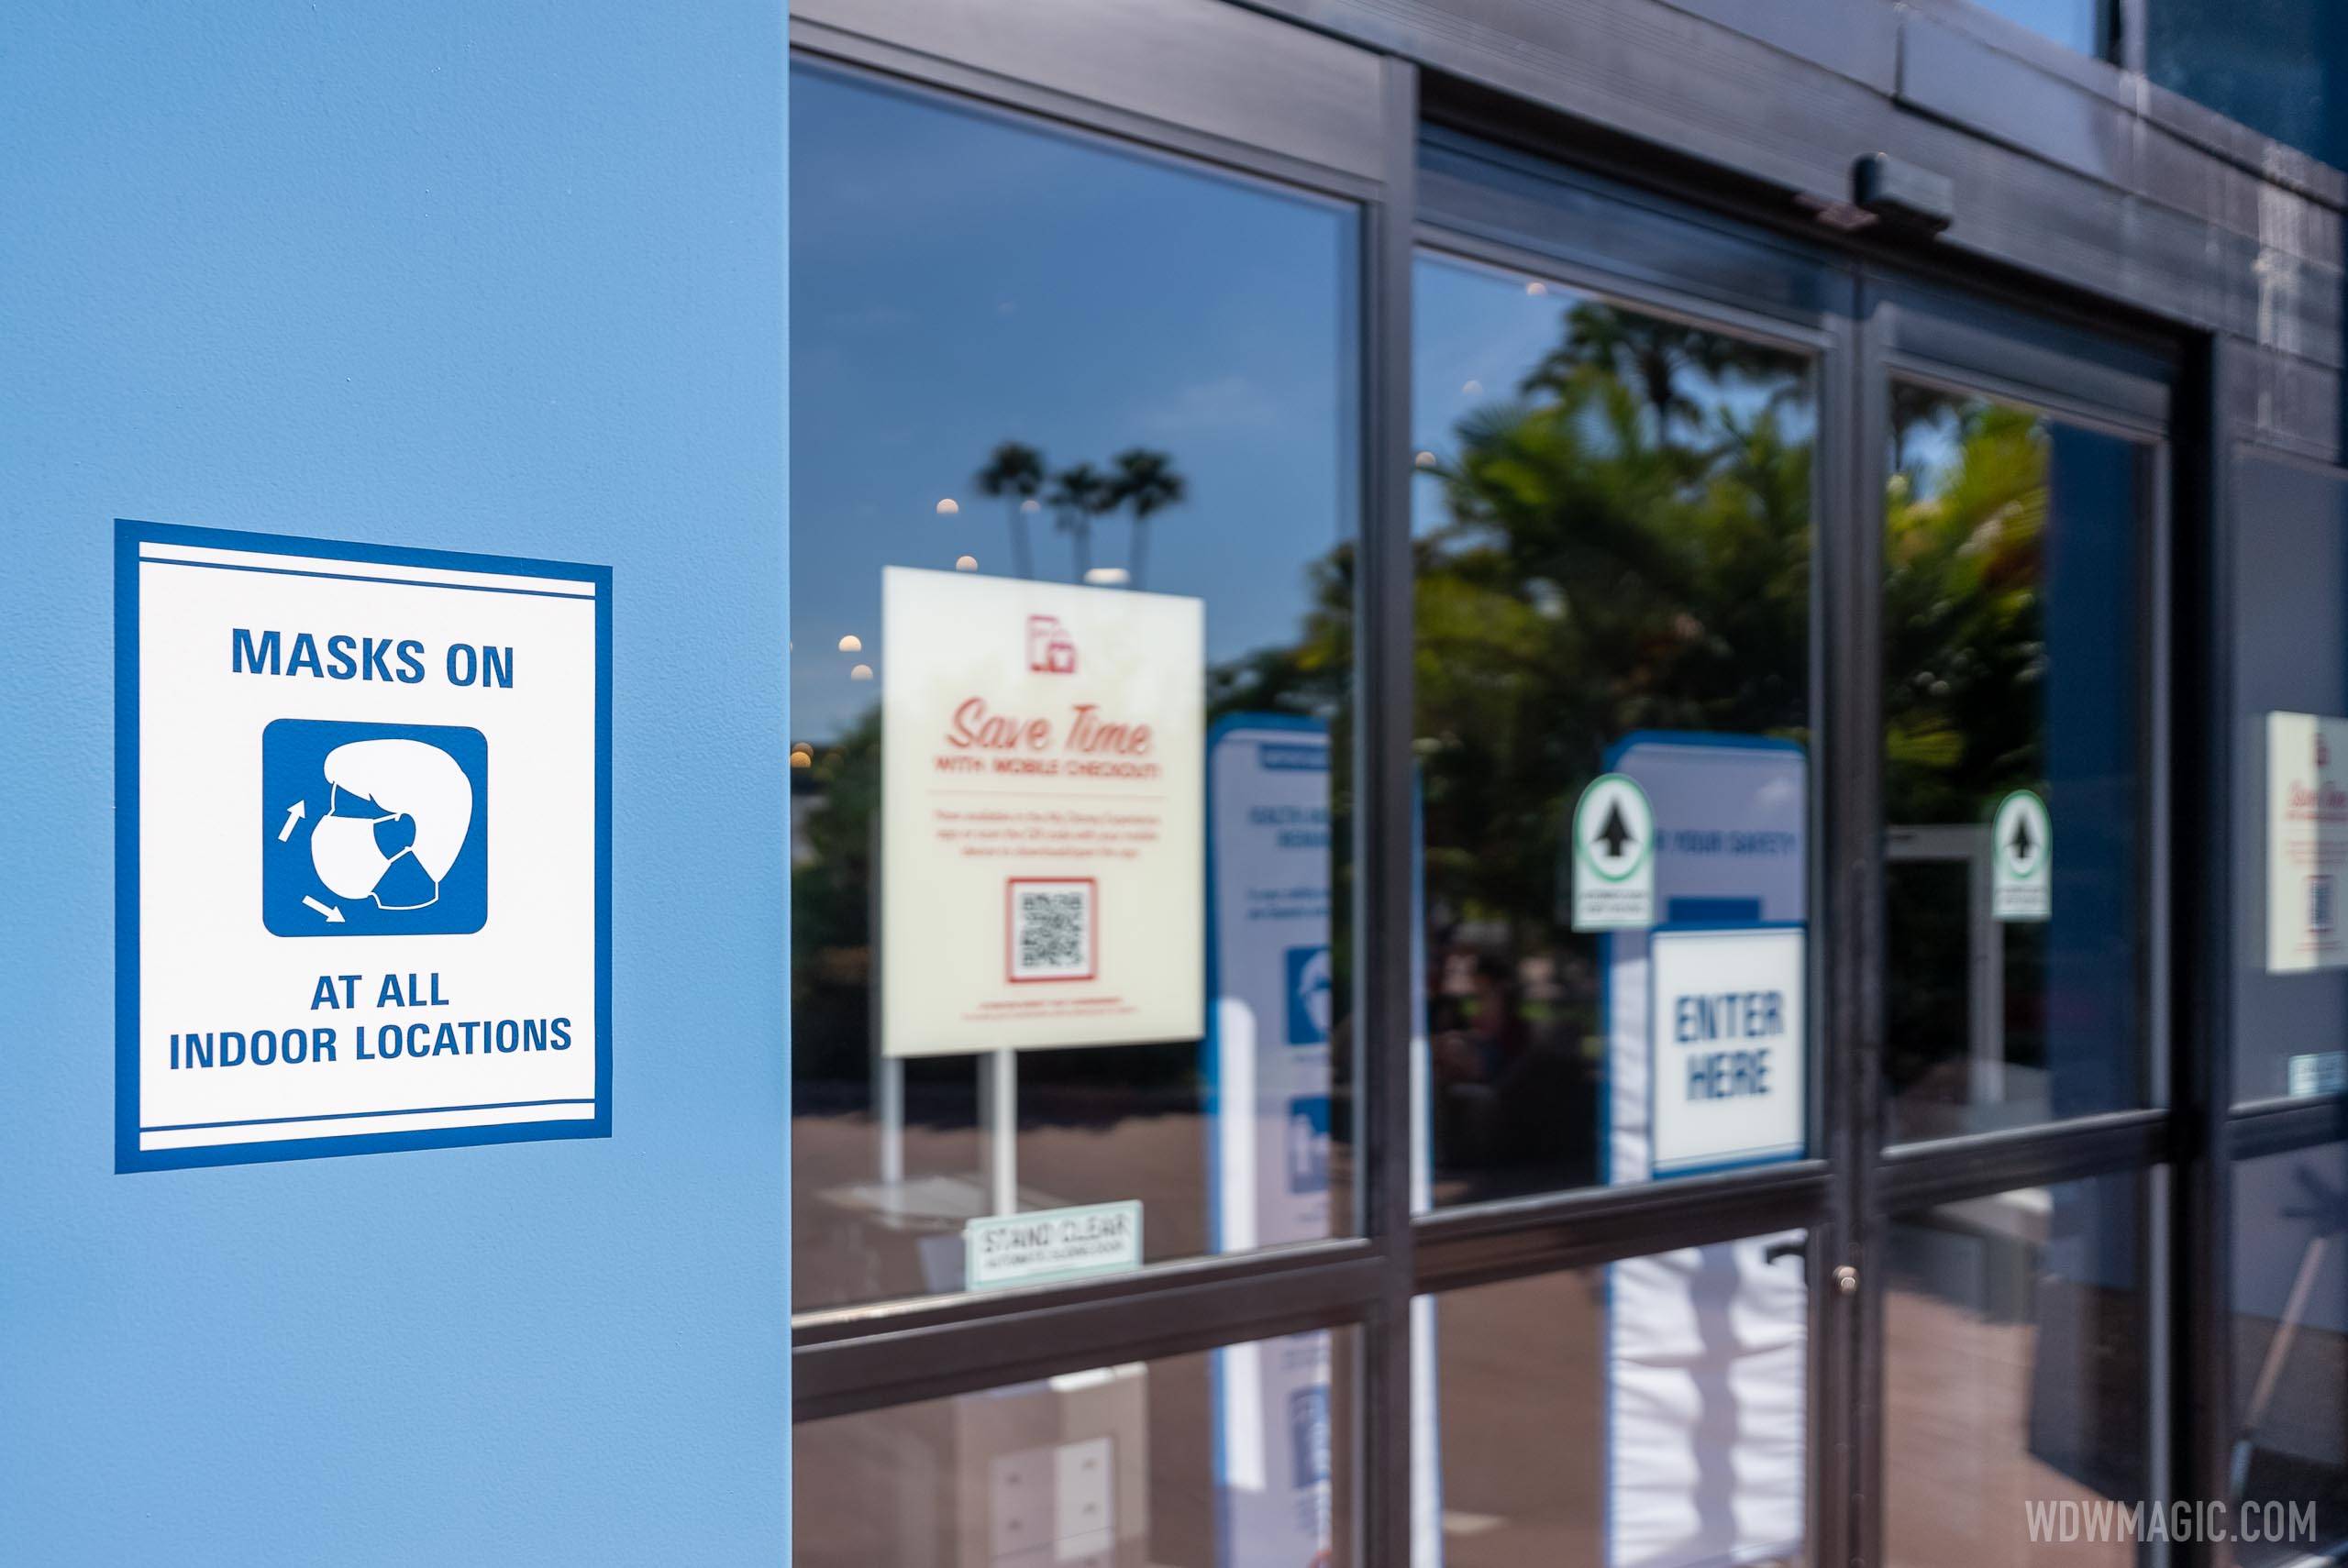 Disney has just recently installed 'Masks On' signage outside many buildings